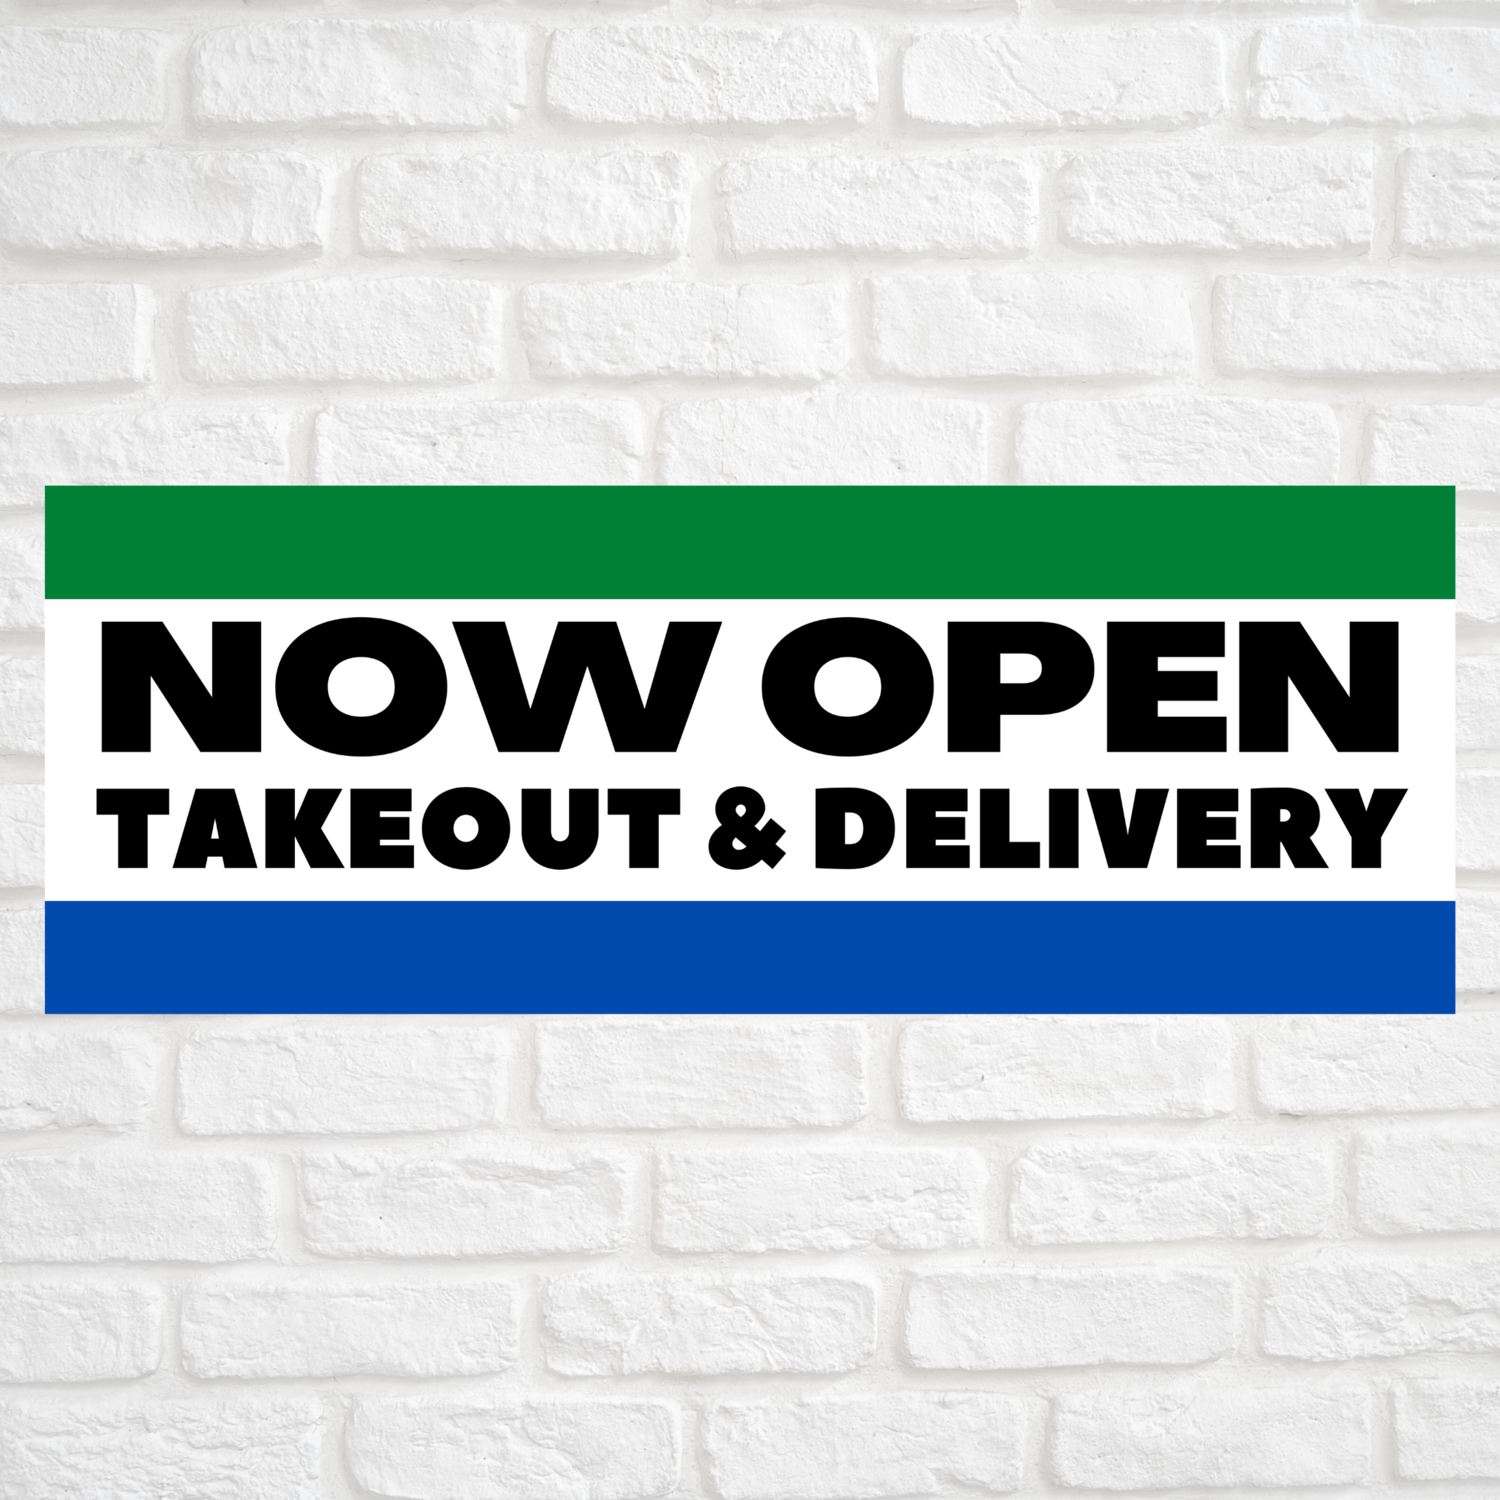 Now Open Takeout & Delivery Green/Blue